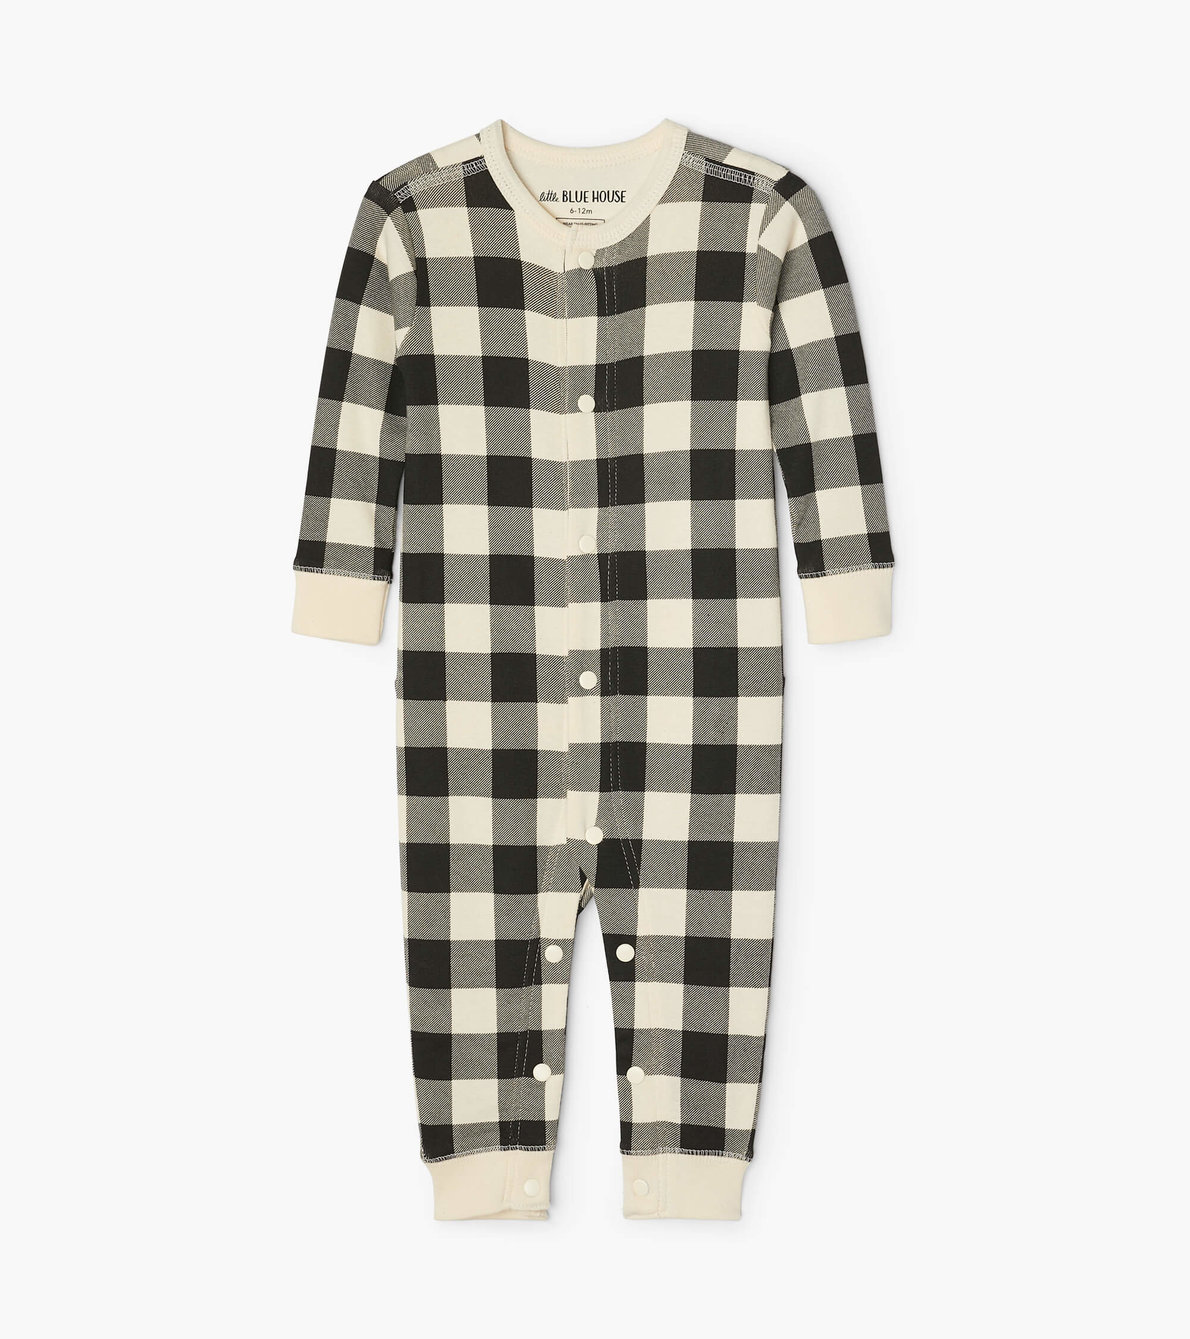 View larger image of Cream Plaid Baby Union Suit